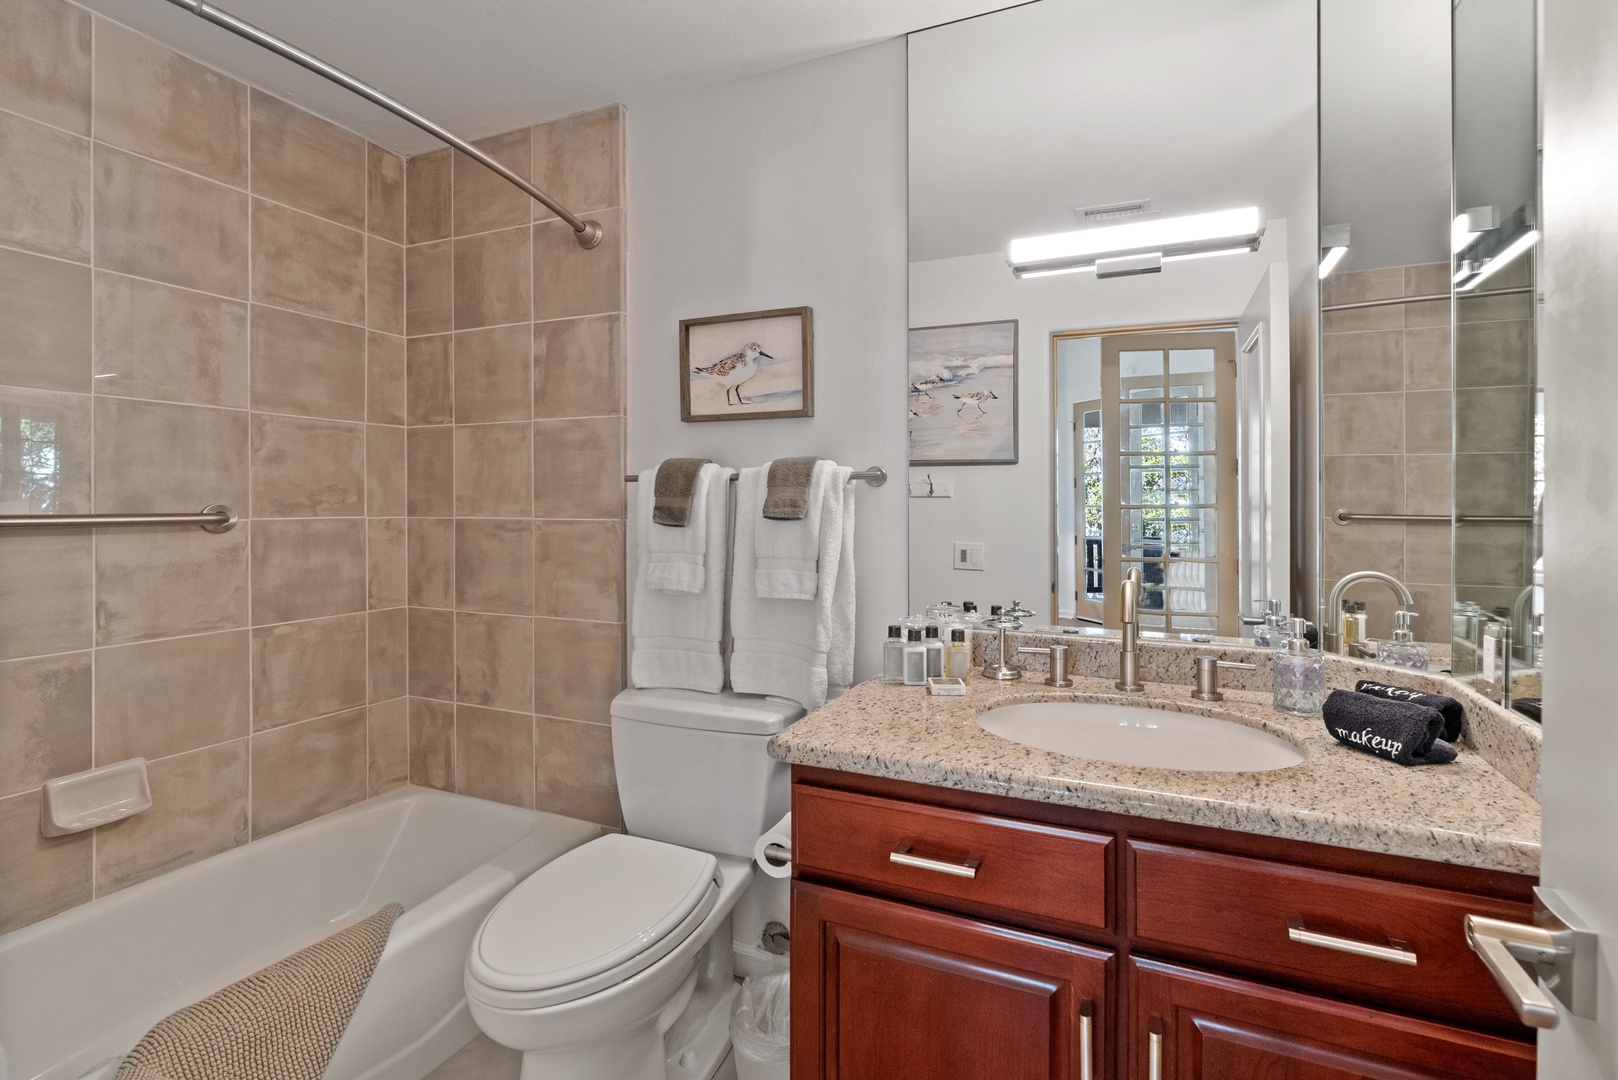 La Jolla Vacation Rentals, Coastal Lookout - Full bath private ensuite to Bedroom 1 with shower/tub combination